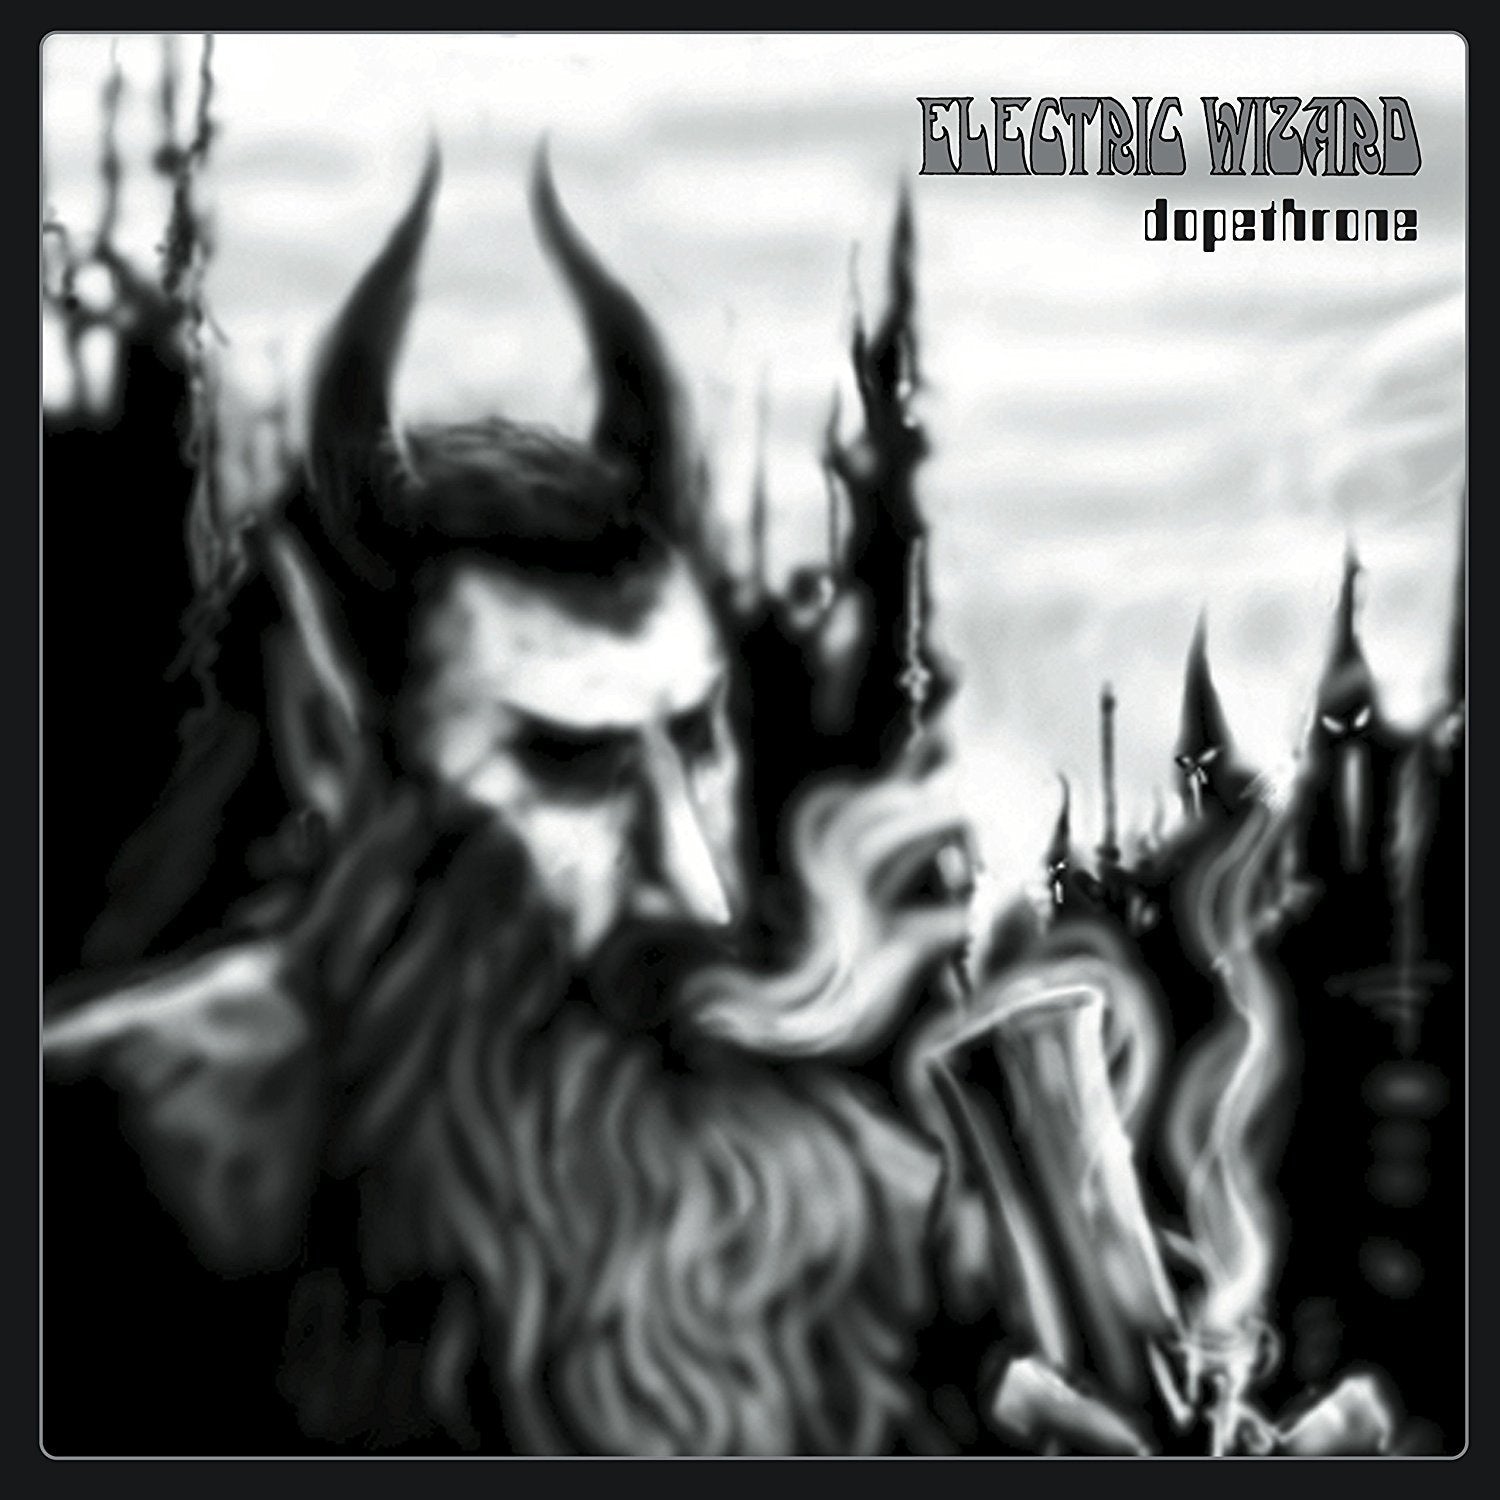 ELECTRIC WIZARD "Dopethrone" CD